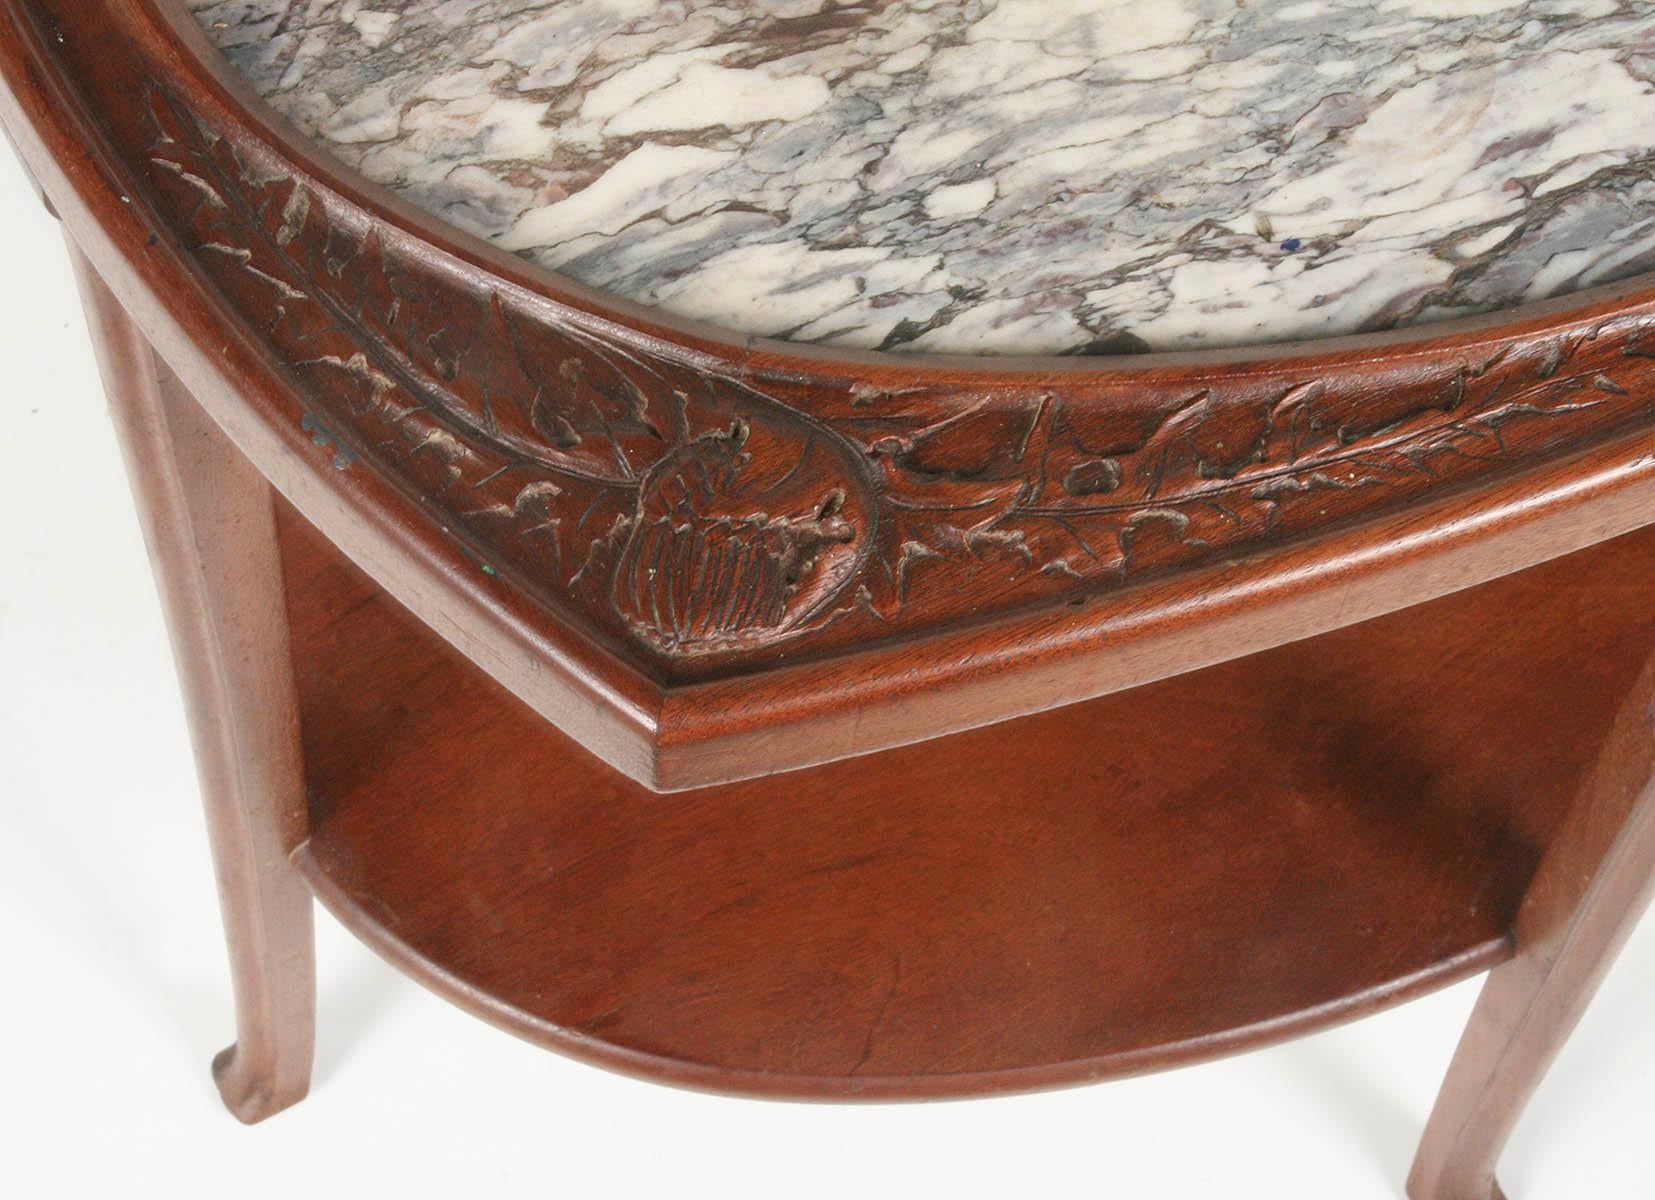 Early 20th Century French Mahogany Side Table Art Nouveau with Brescia Violet Marble Top For Sale